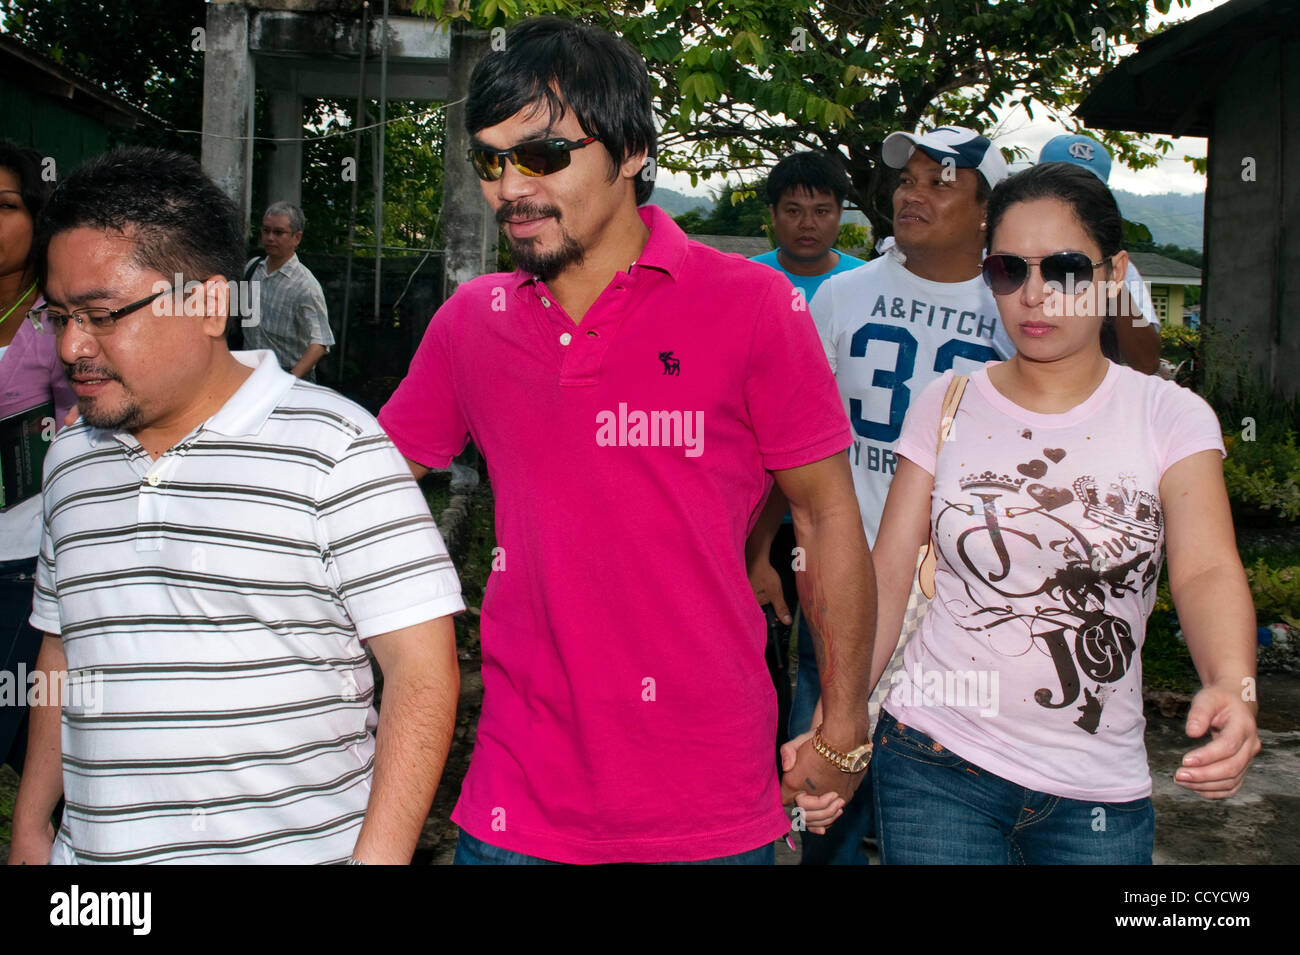 May 09, 2010 - Kiamba, Sarangani, Philippines - Boxing champion Manny Pacquiao accompanied by his wife Jinkee arrives at the polling station on 10 May 2010 in Kiamba, Sarangani Philippines..Manny Pacquiao is running for the congressman..For the first time some 50 million Filipinos will have a chance Stock Photo